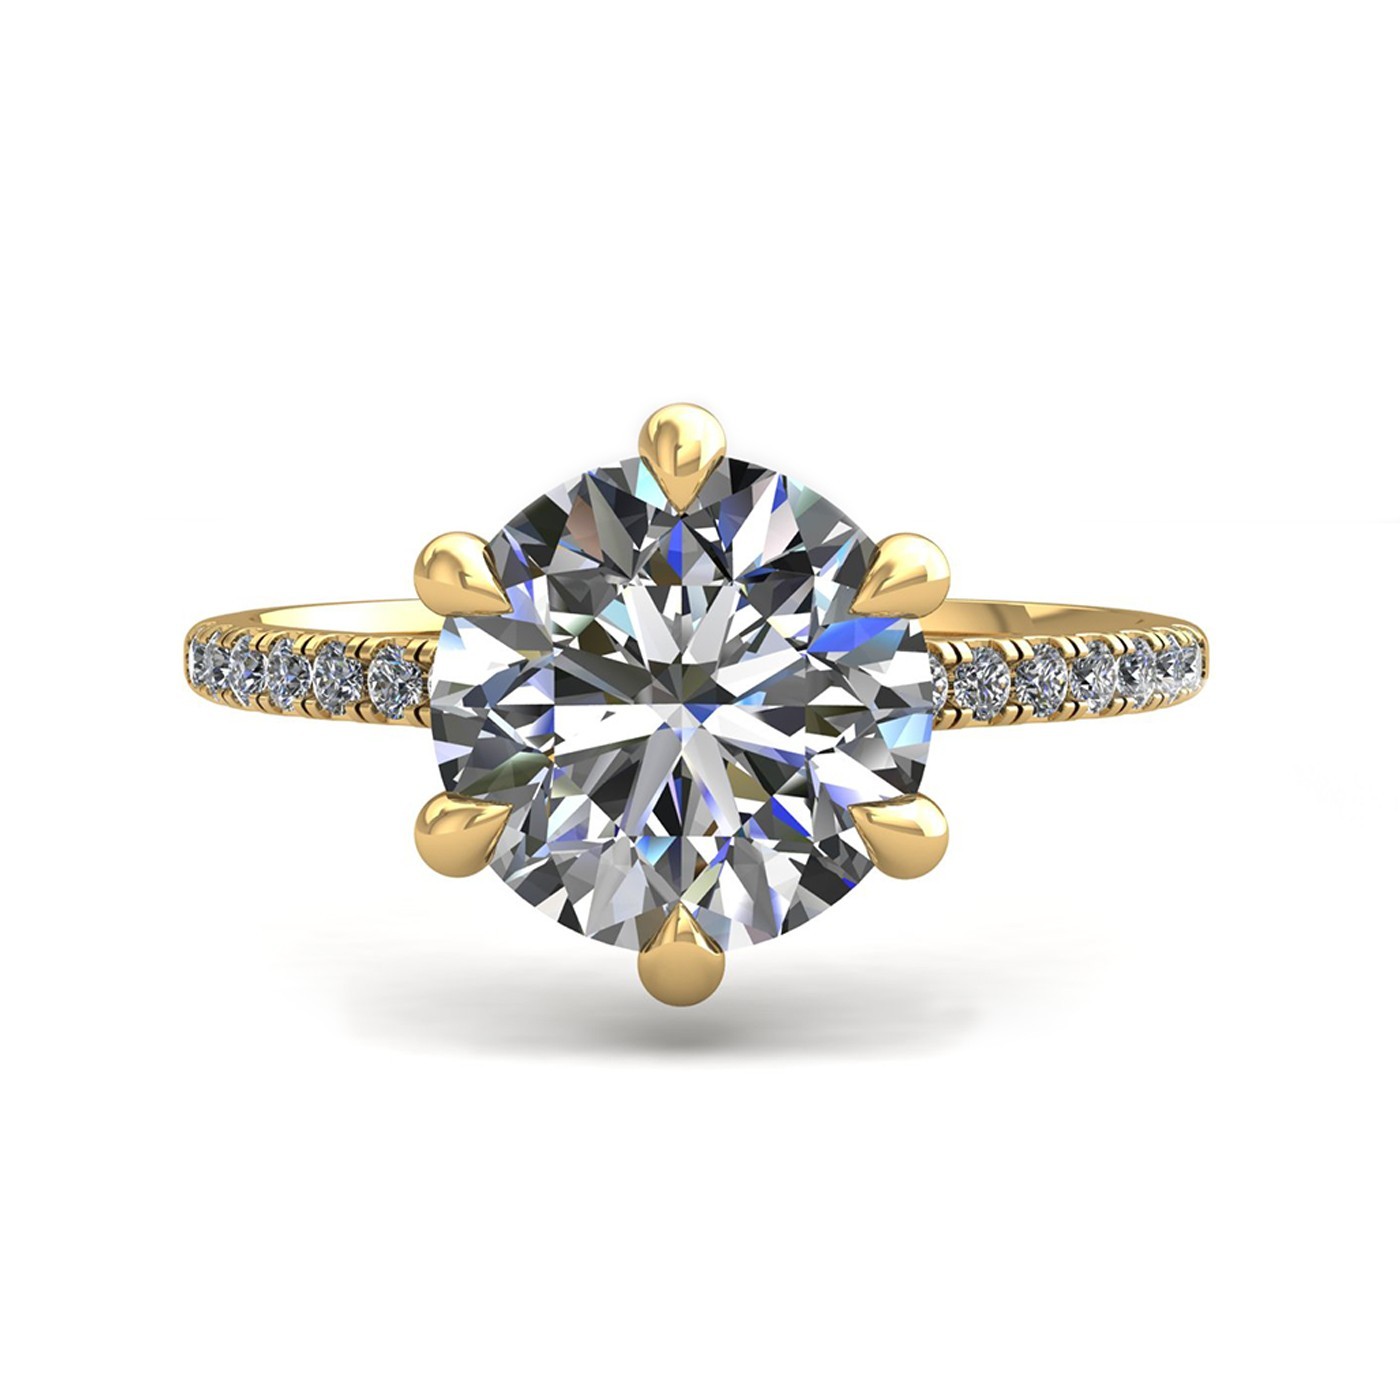 18k yellow gold 1,20 ct 6 prongs round cut diamond engagement ring with whisper thin pavÉ set band Photos & images